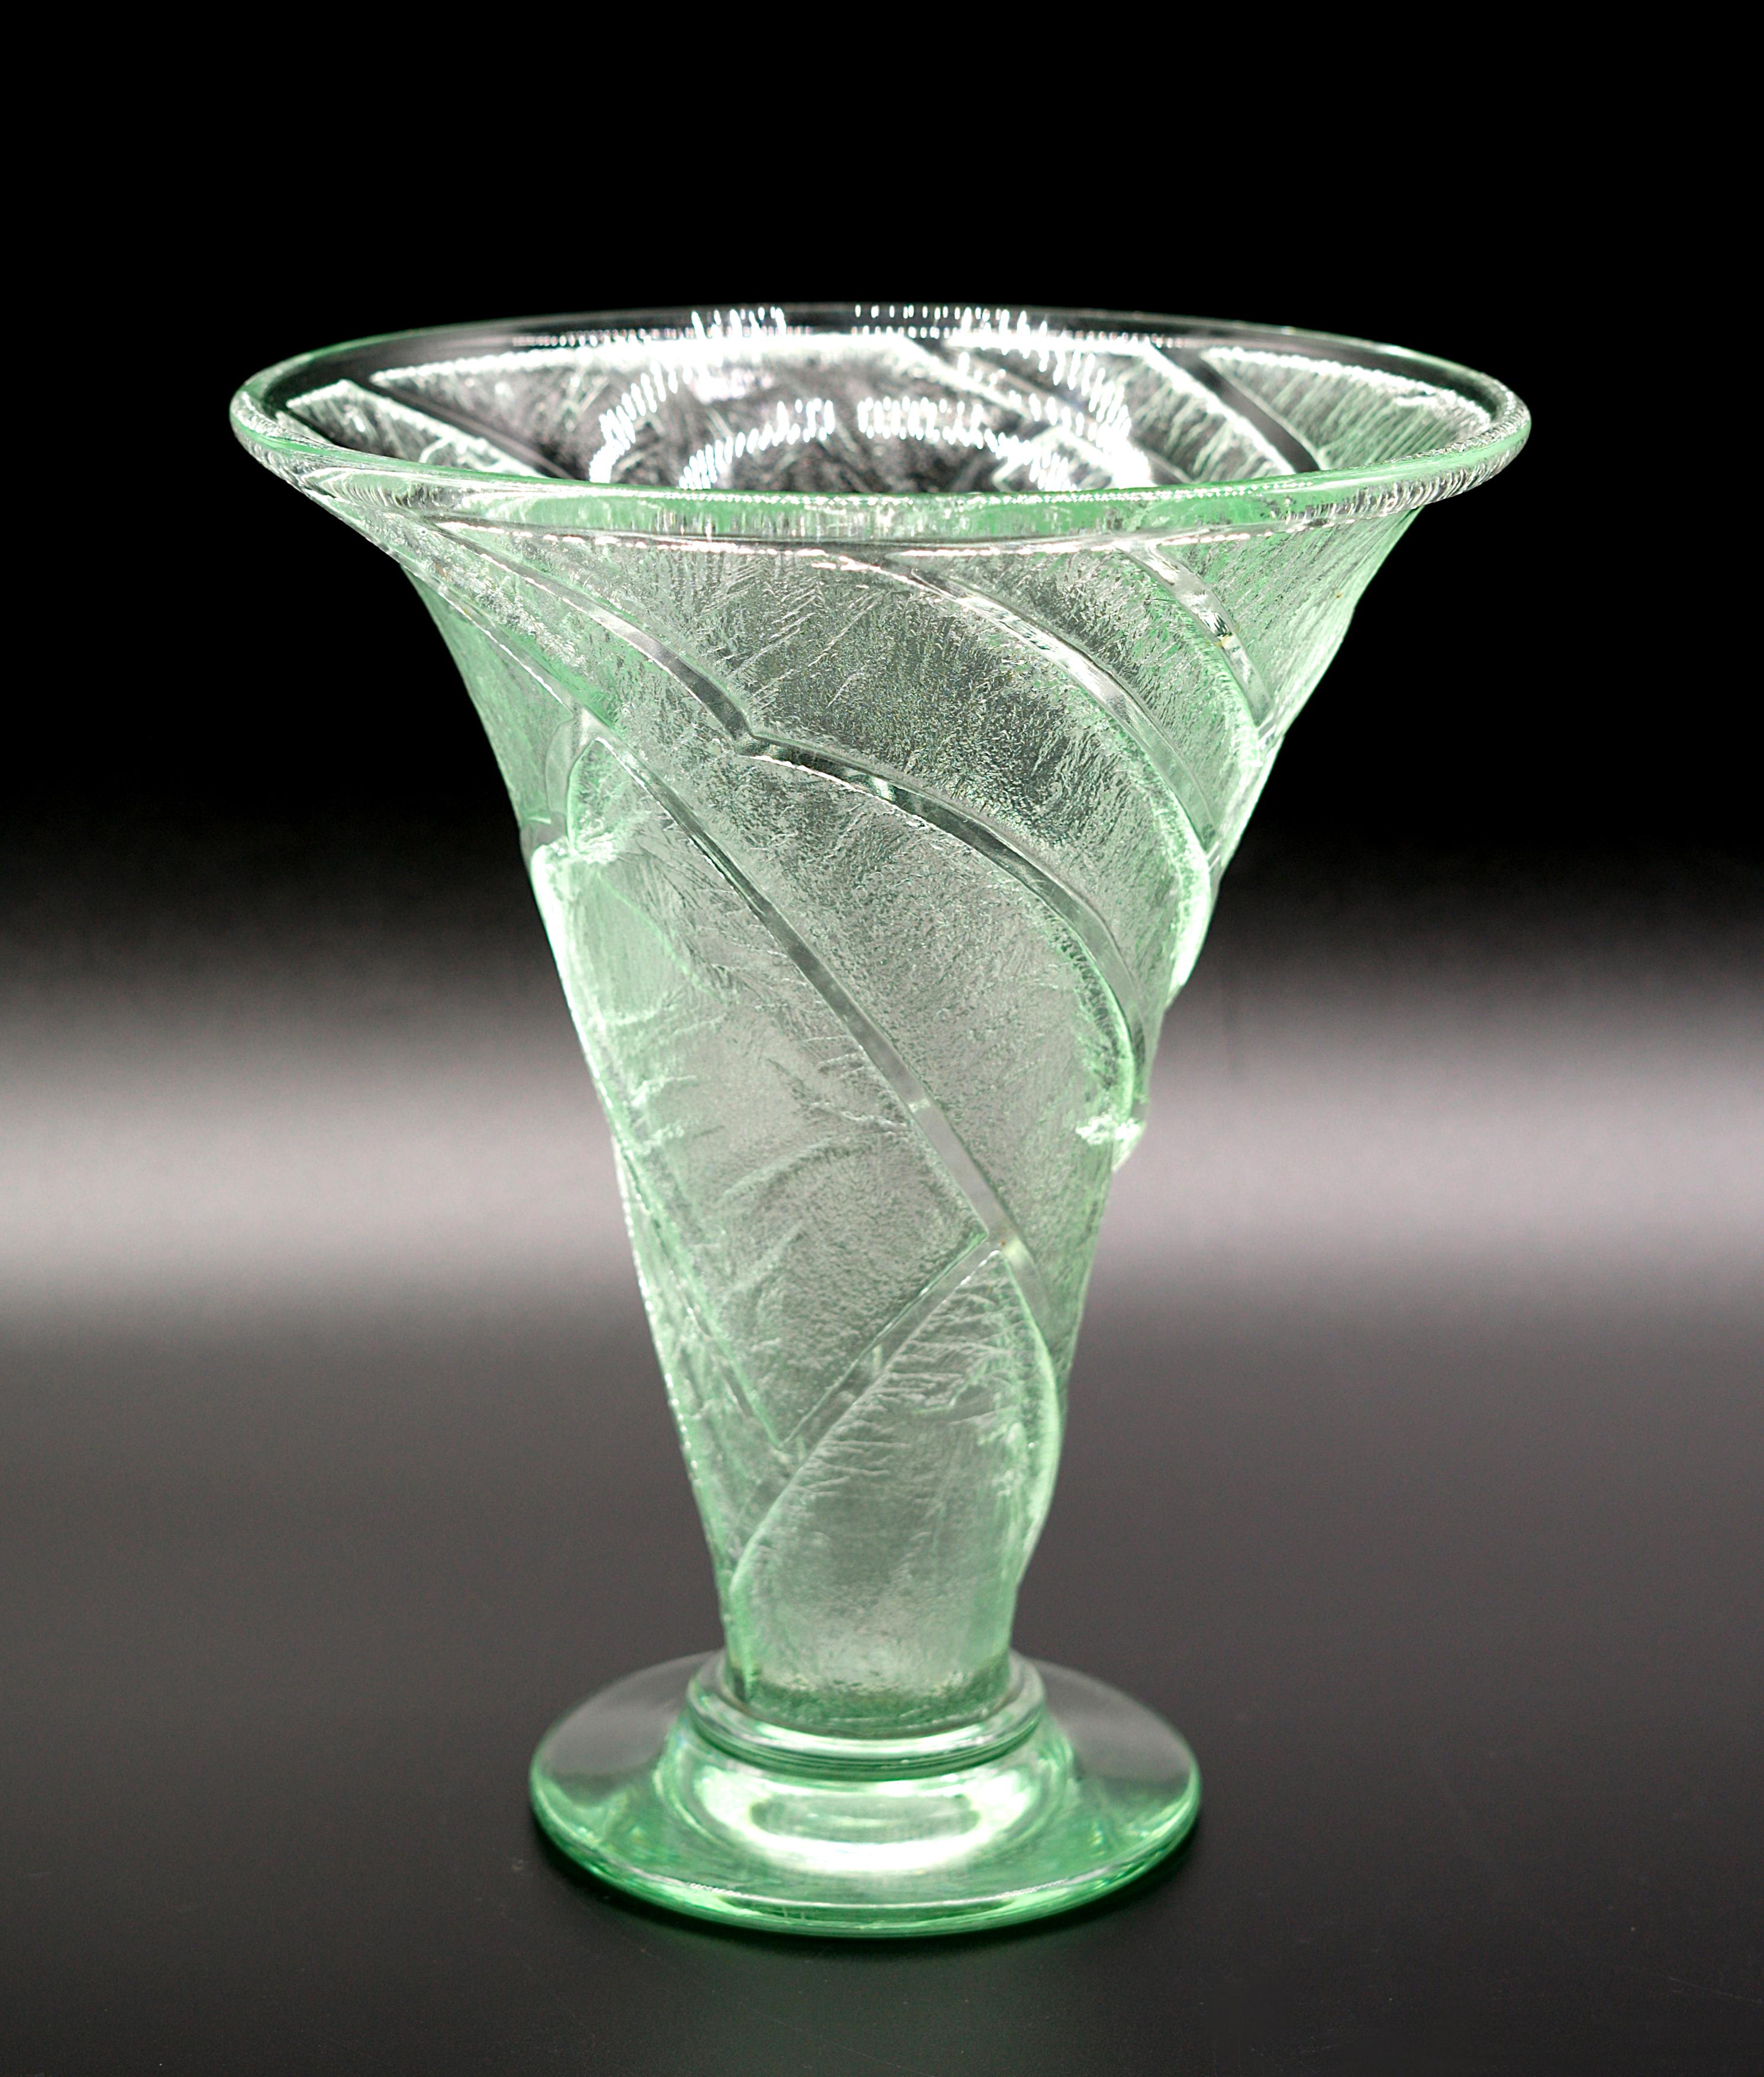 French Art Deco acid-etched glass vase by DAUM (Nancy), France, 1930s. Color : green. Measures: height : 8.3